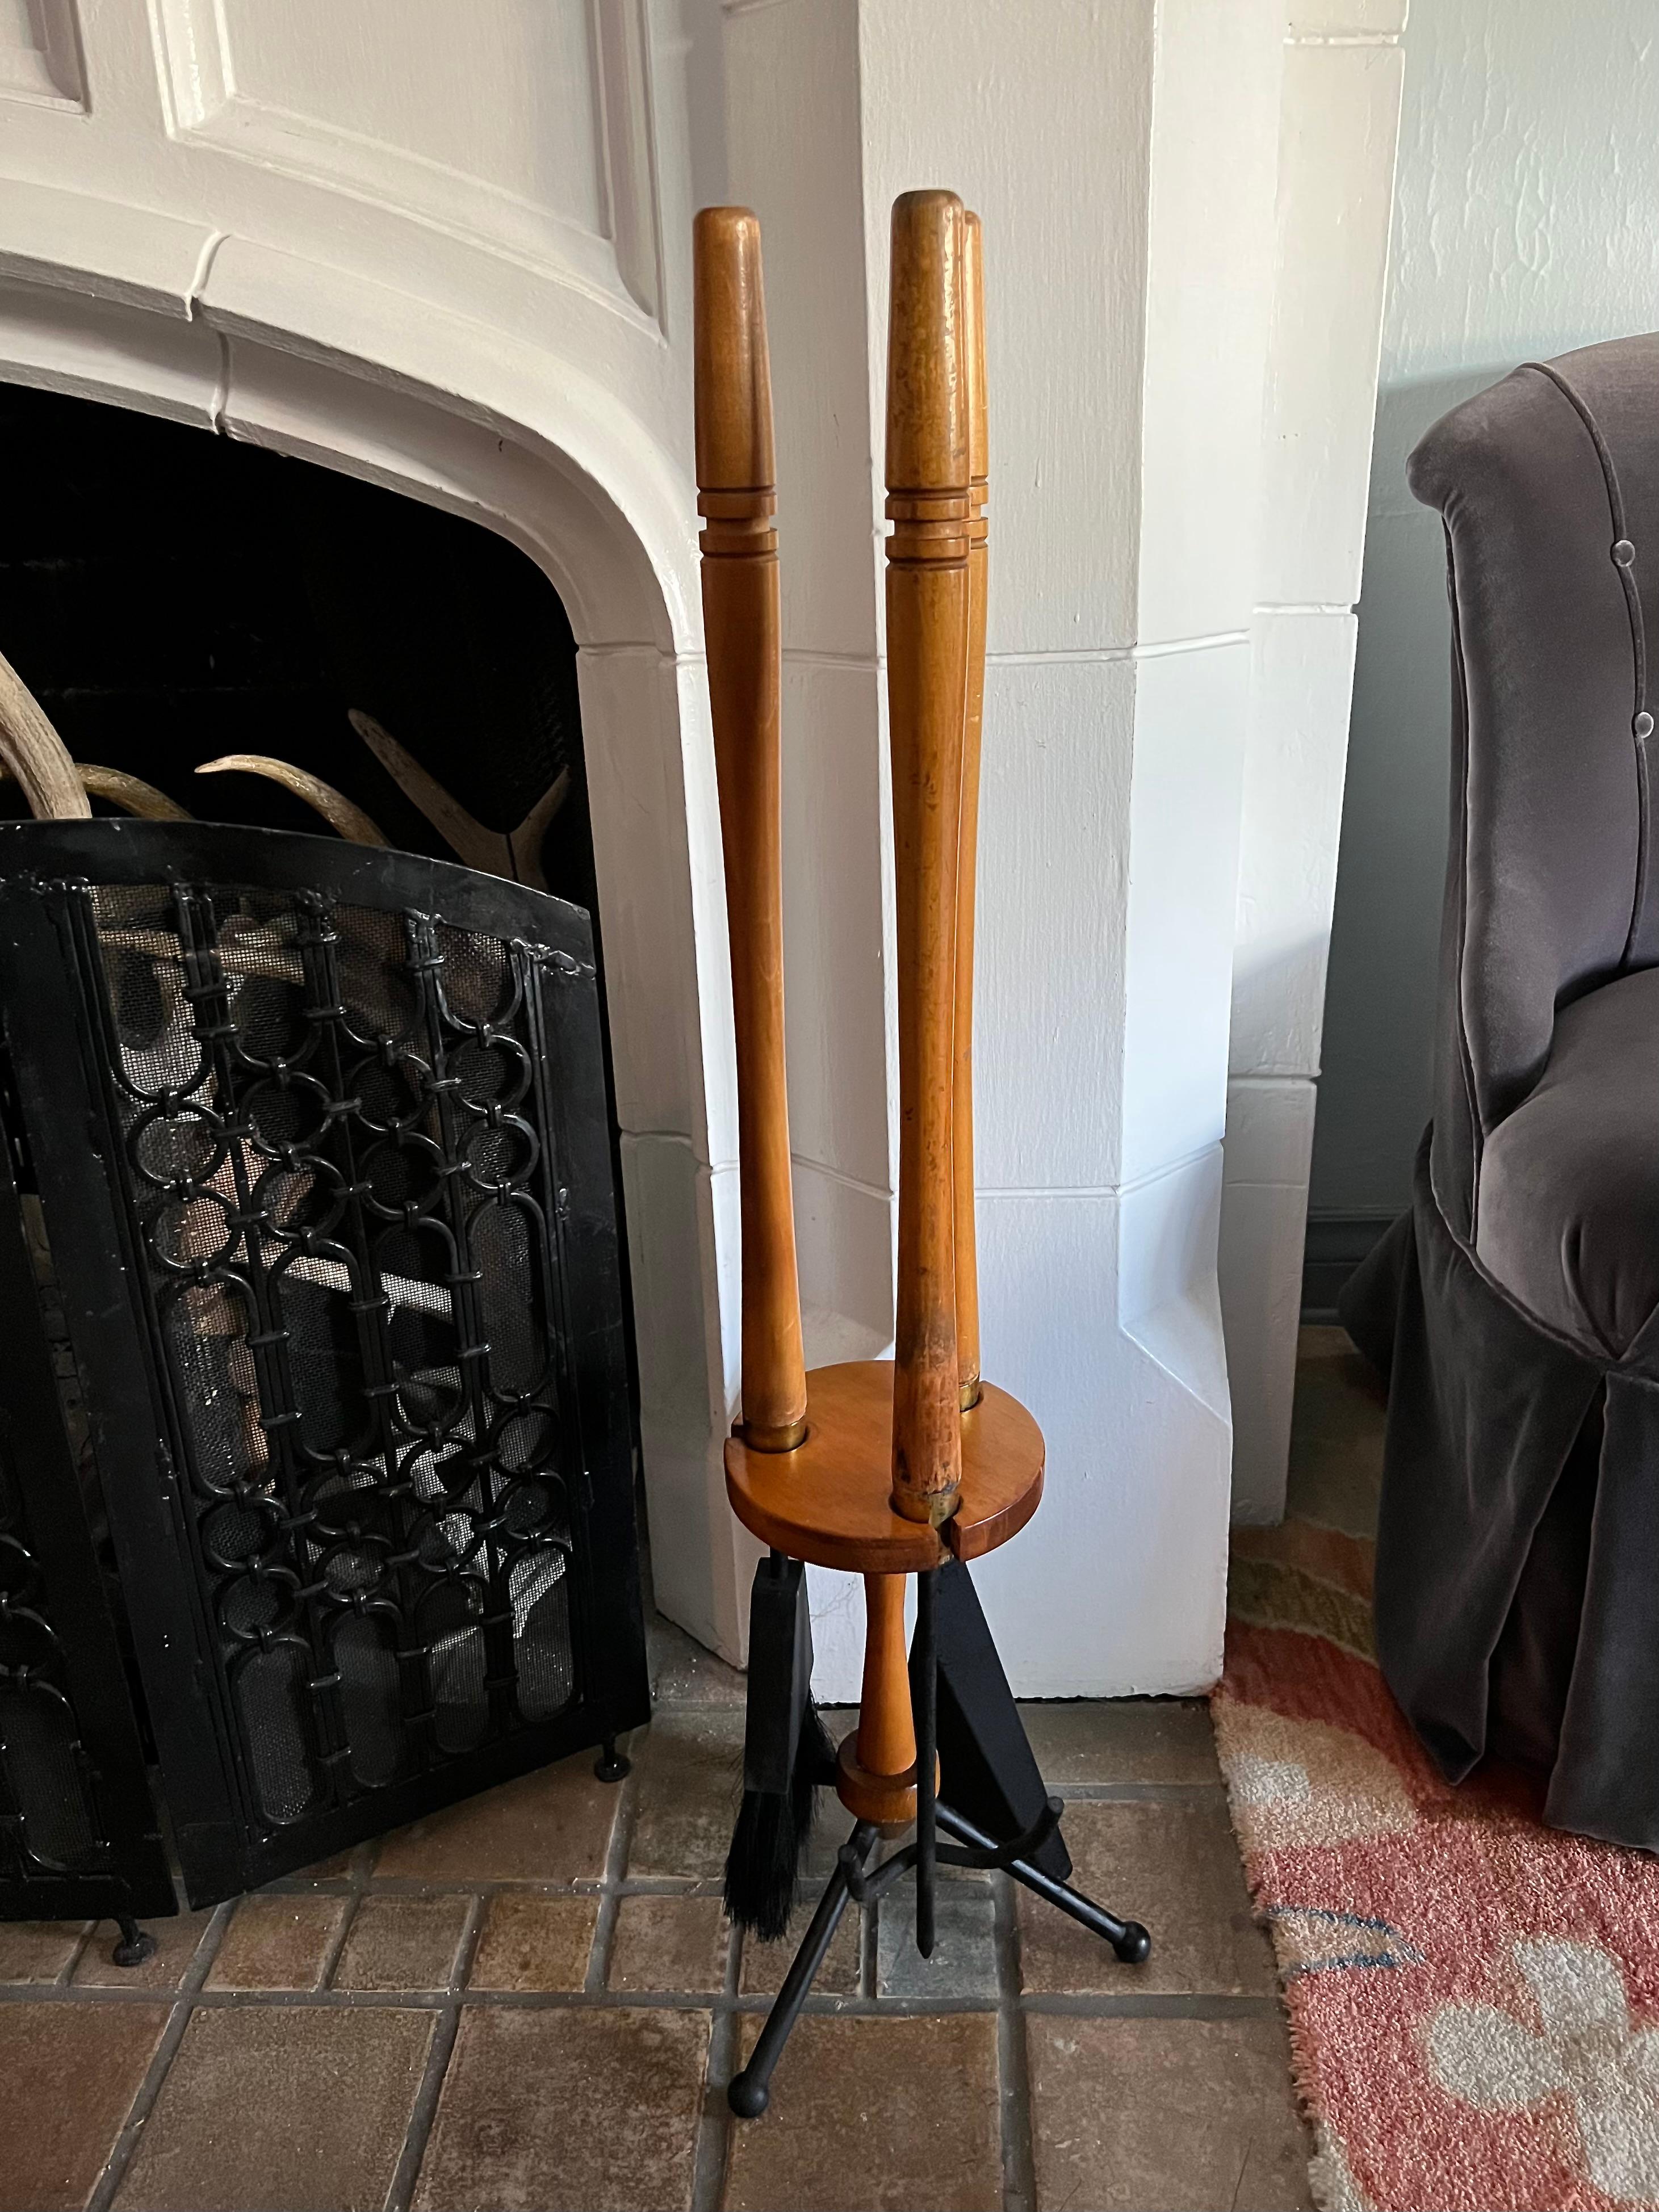 Gorgeous midcentury sculptural fireplace tool set with warm patinated maple wood, brass, and clean black accents. A complement to any fireplace, perfect for cozy warm minimalist homes. Designed by Mid Century designer, Arthur Umanoff, in his